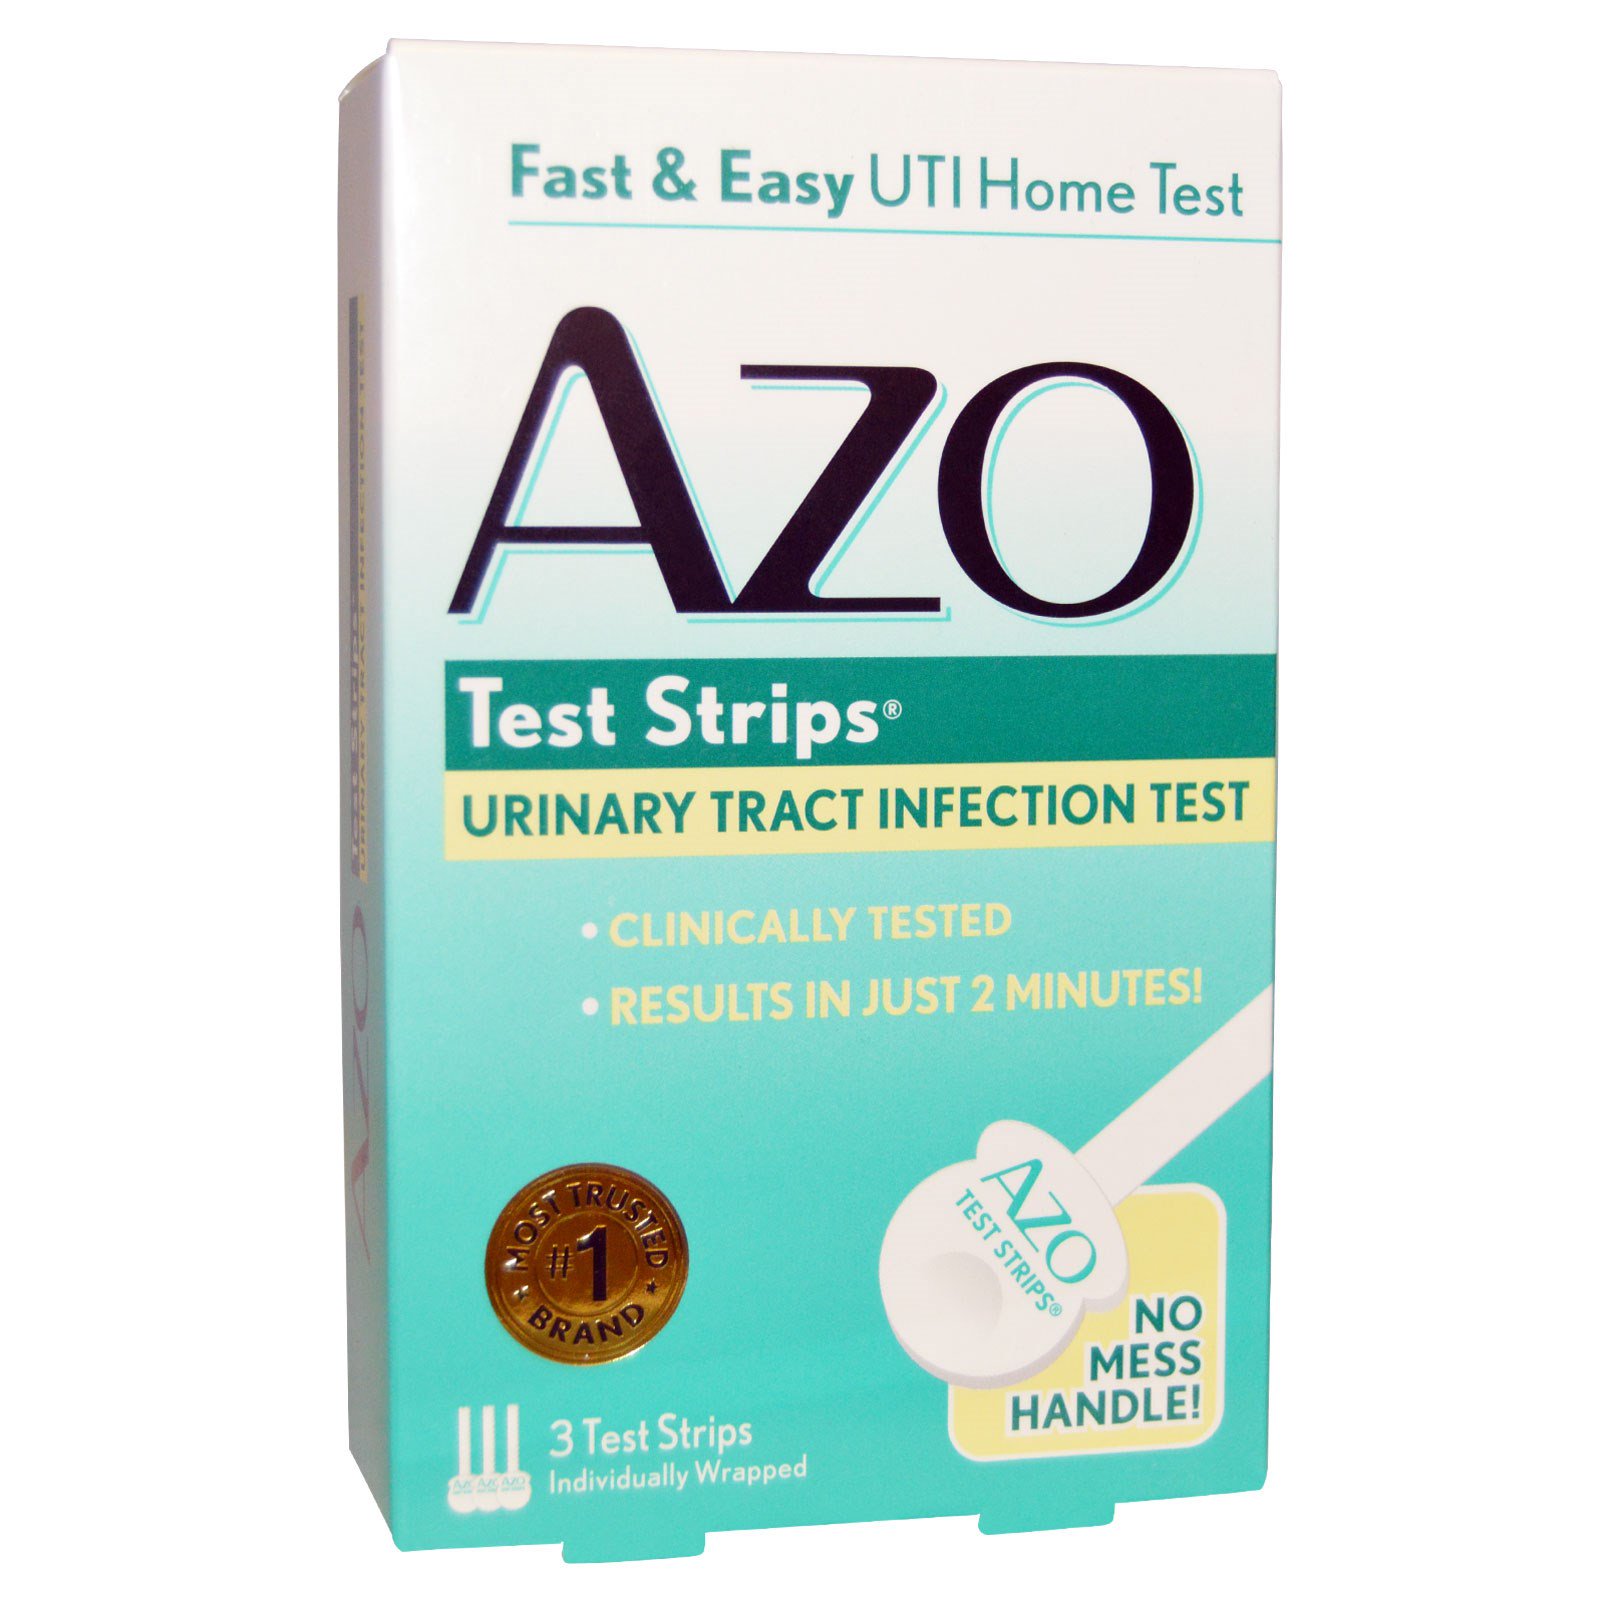 Azo Urinary Tract Infection Test Strips 3 Test Strips 6033